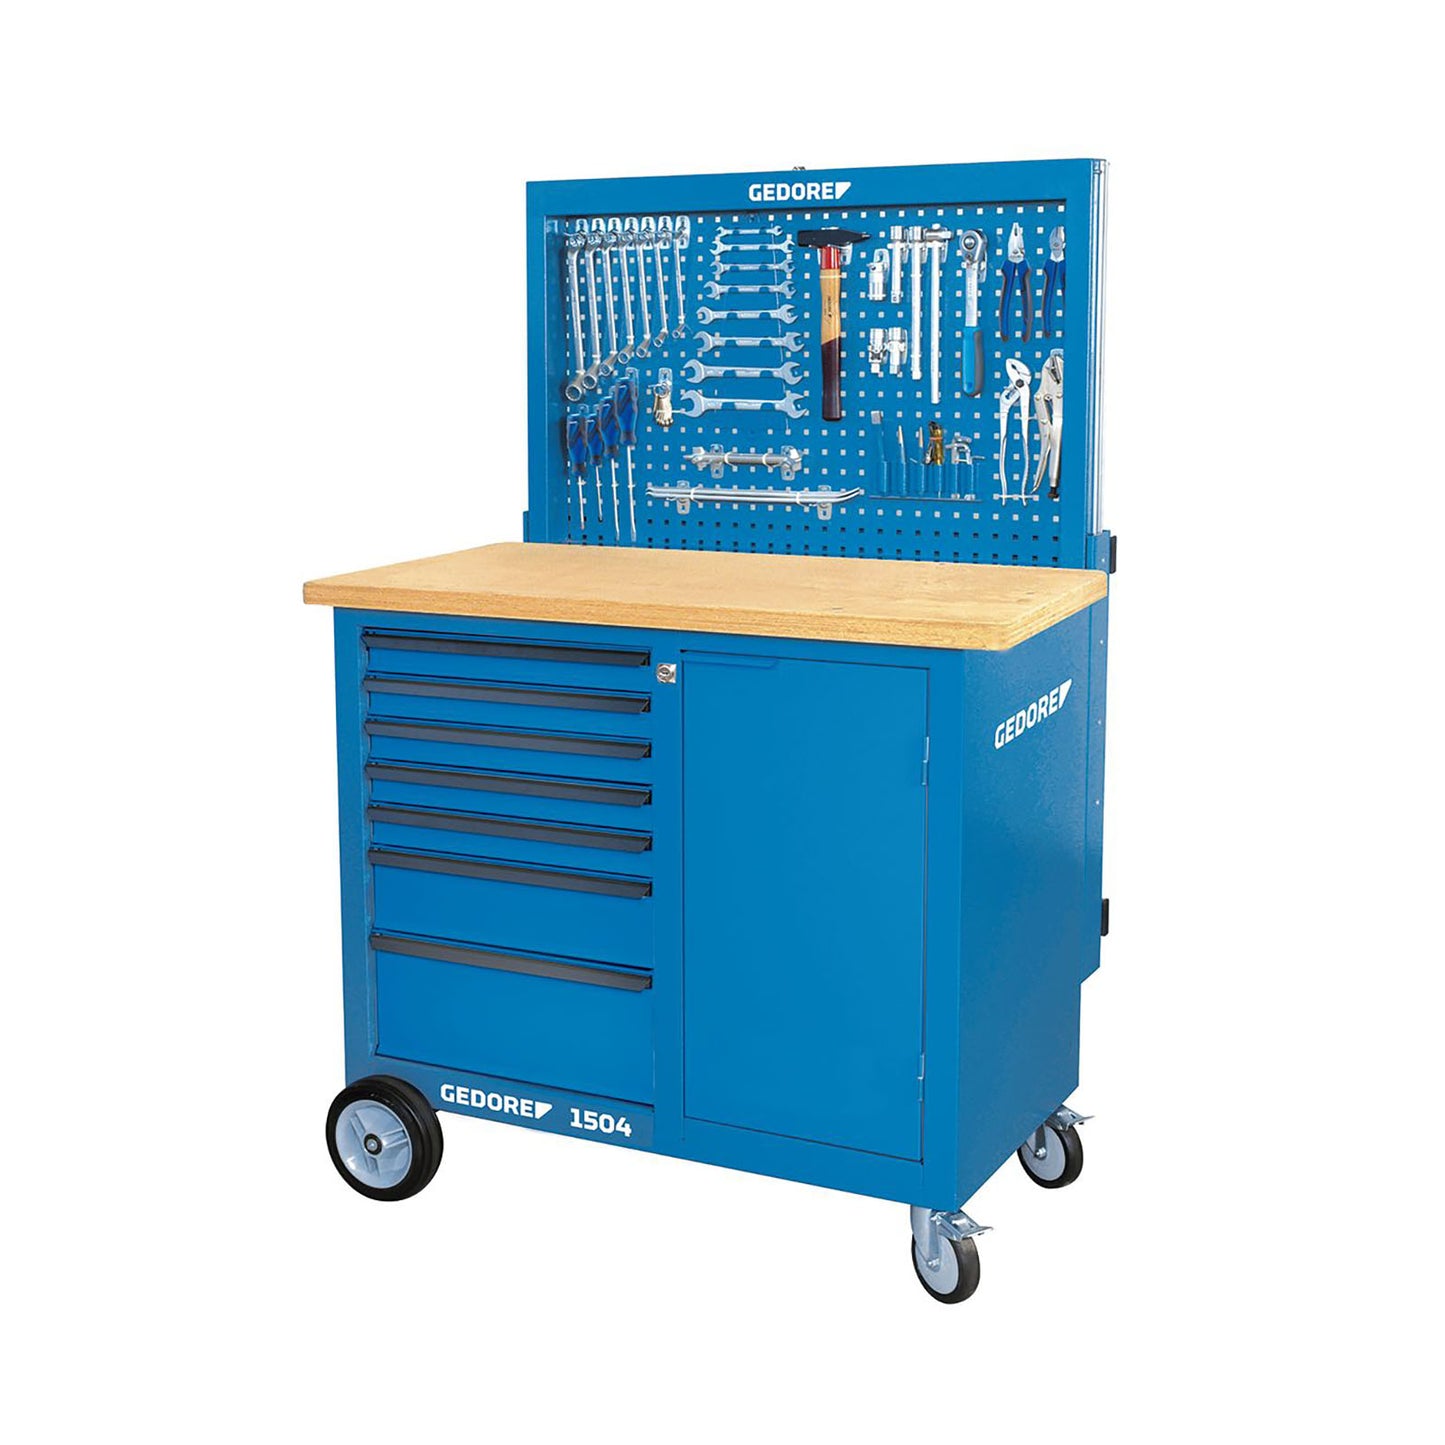 GEDORE BR 1504 0511 L - Mobile workbench with panel (6624450)